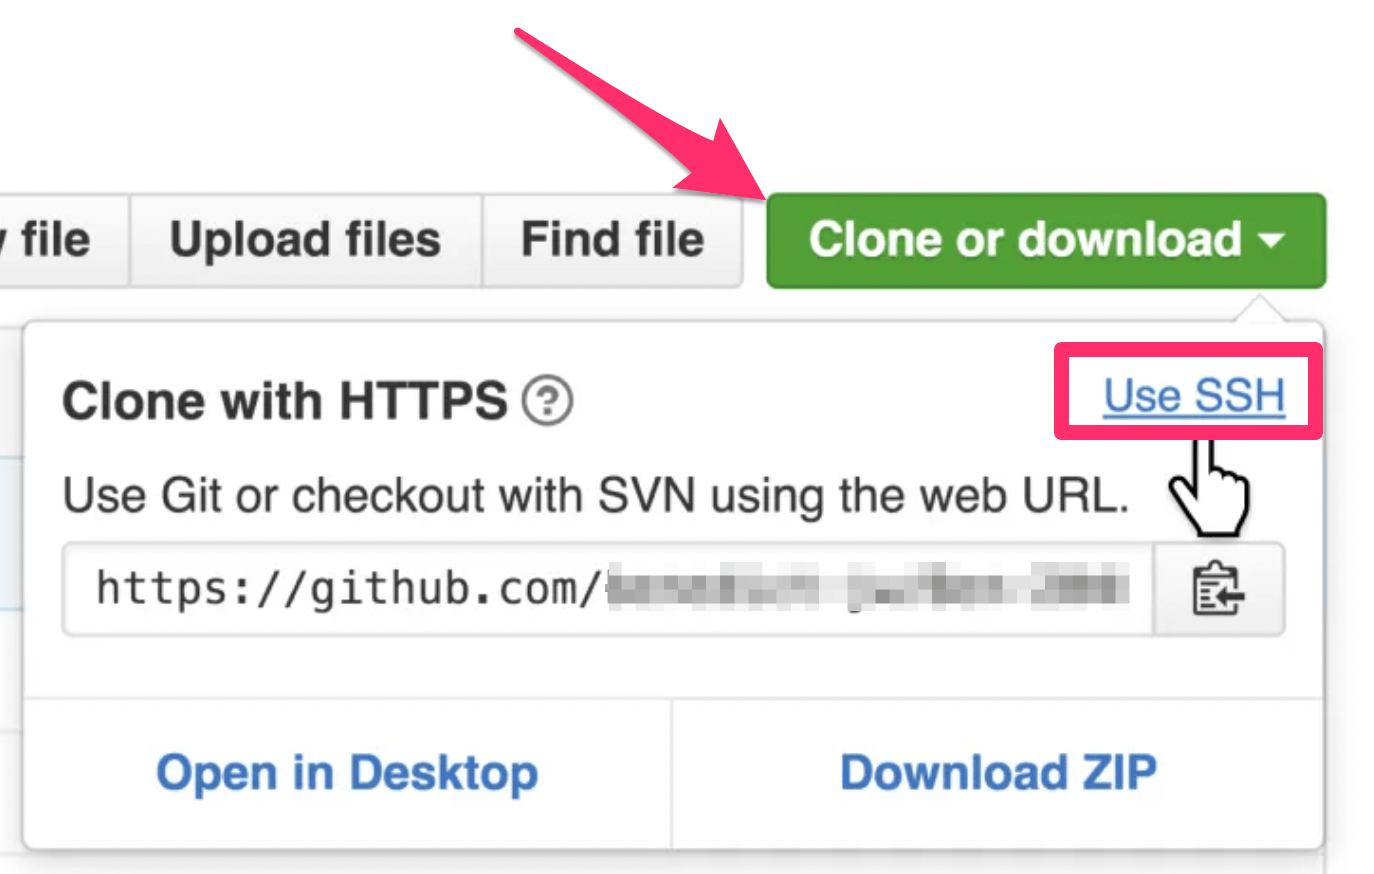 Red arrow pointing to "Clone or download" button on GitHub private repository URL